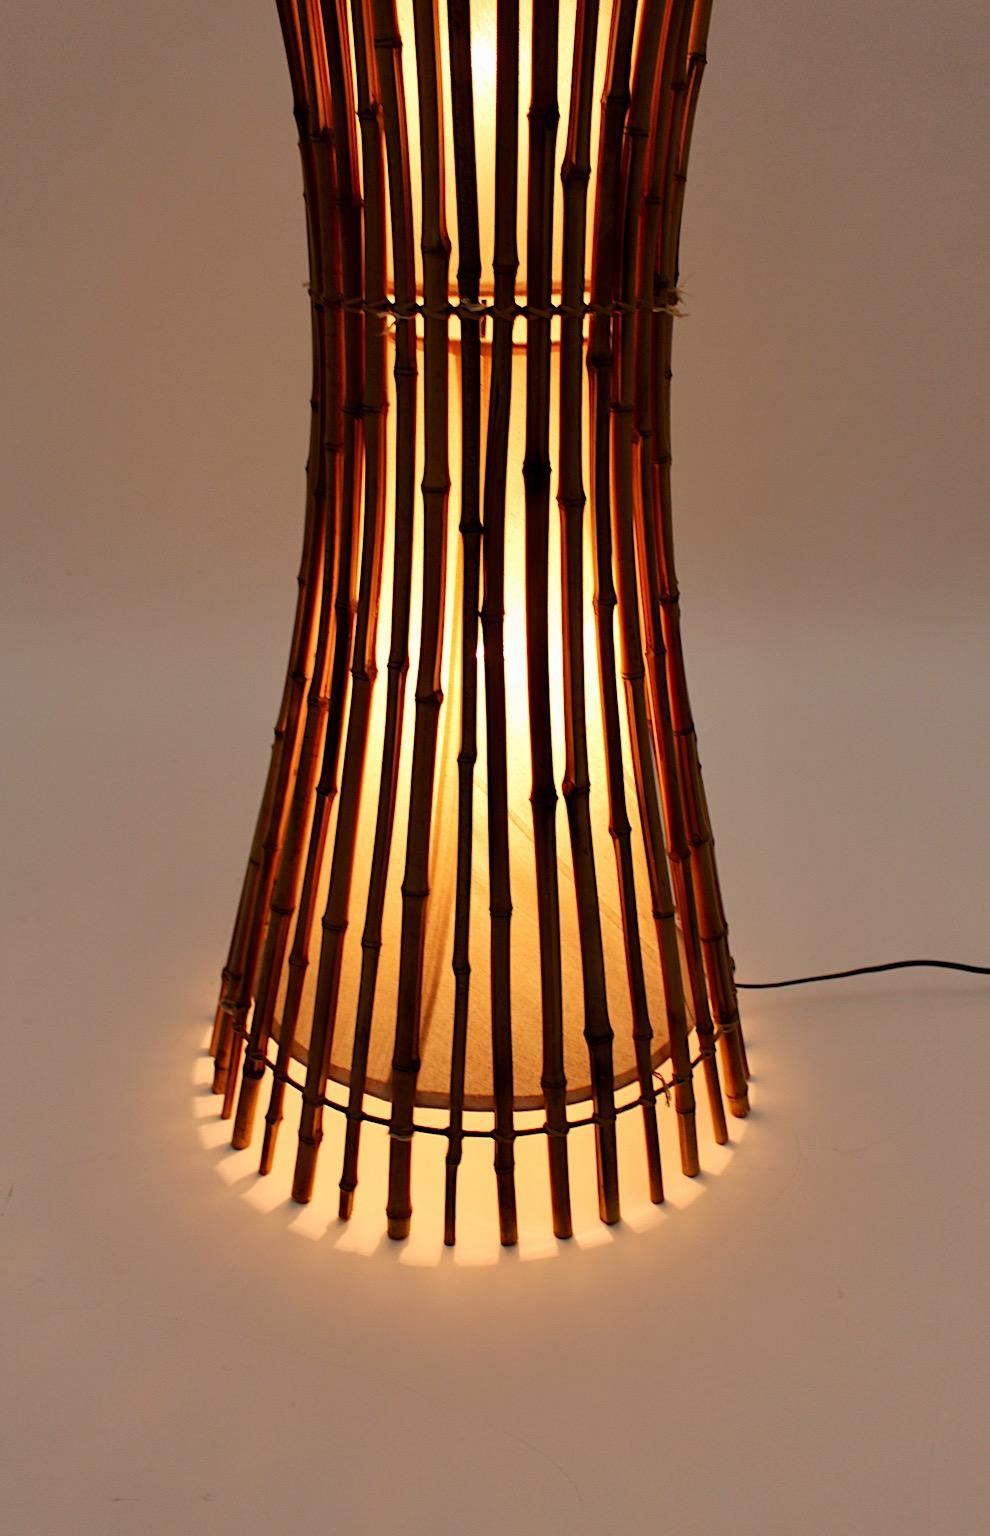 Mid-Century Modern Vintage Sheaf of Bamboo Rattan Organic Floor Lamp 1970s Italy For Sale 2